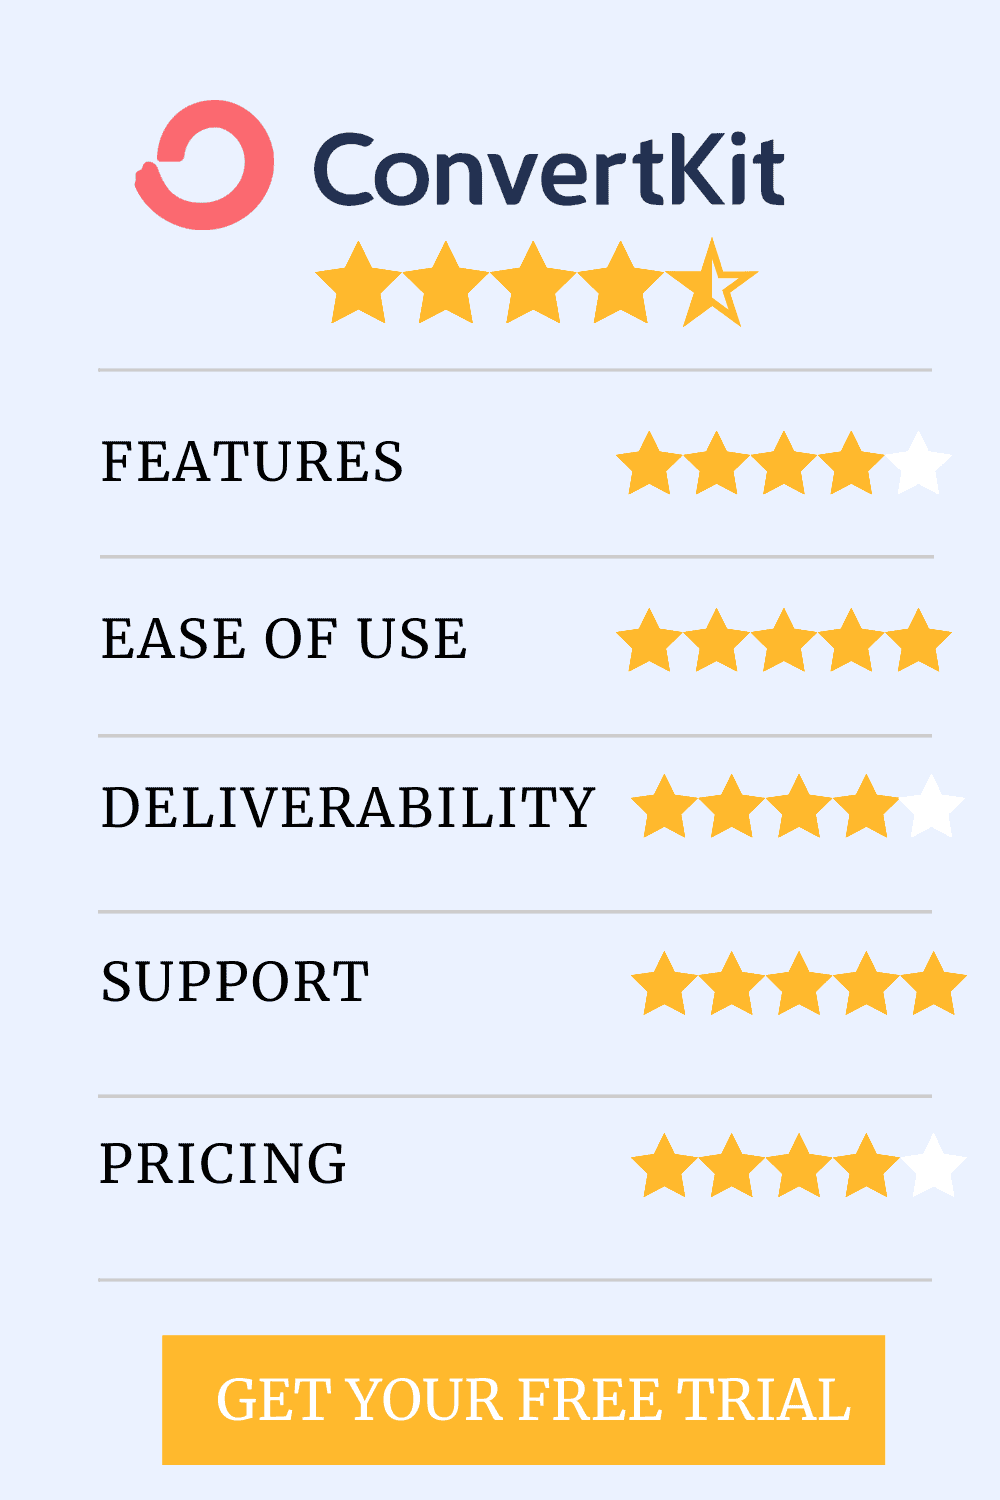 ConvertKit review and rating